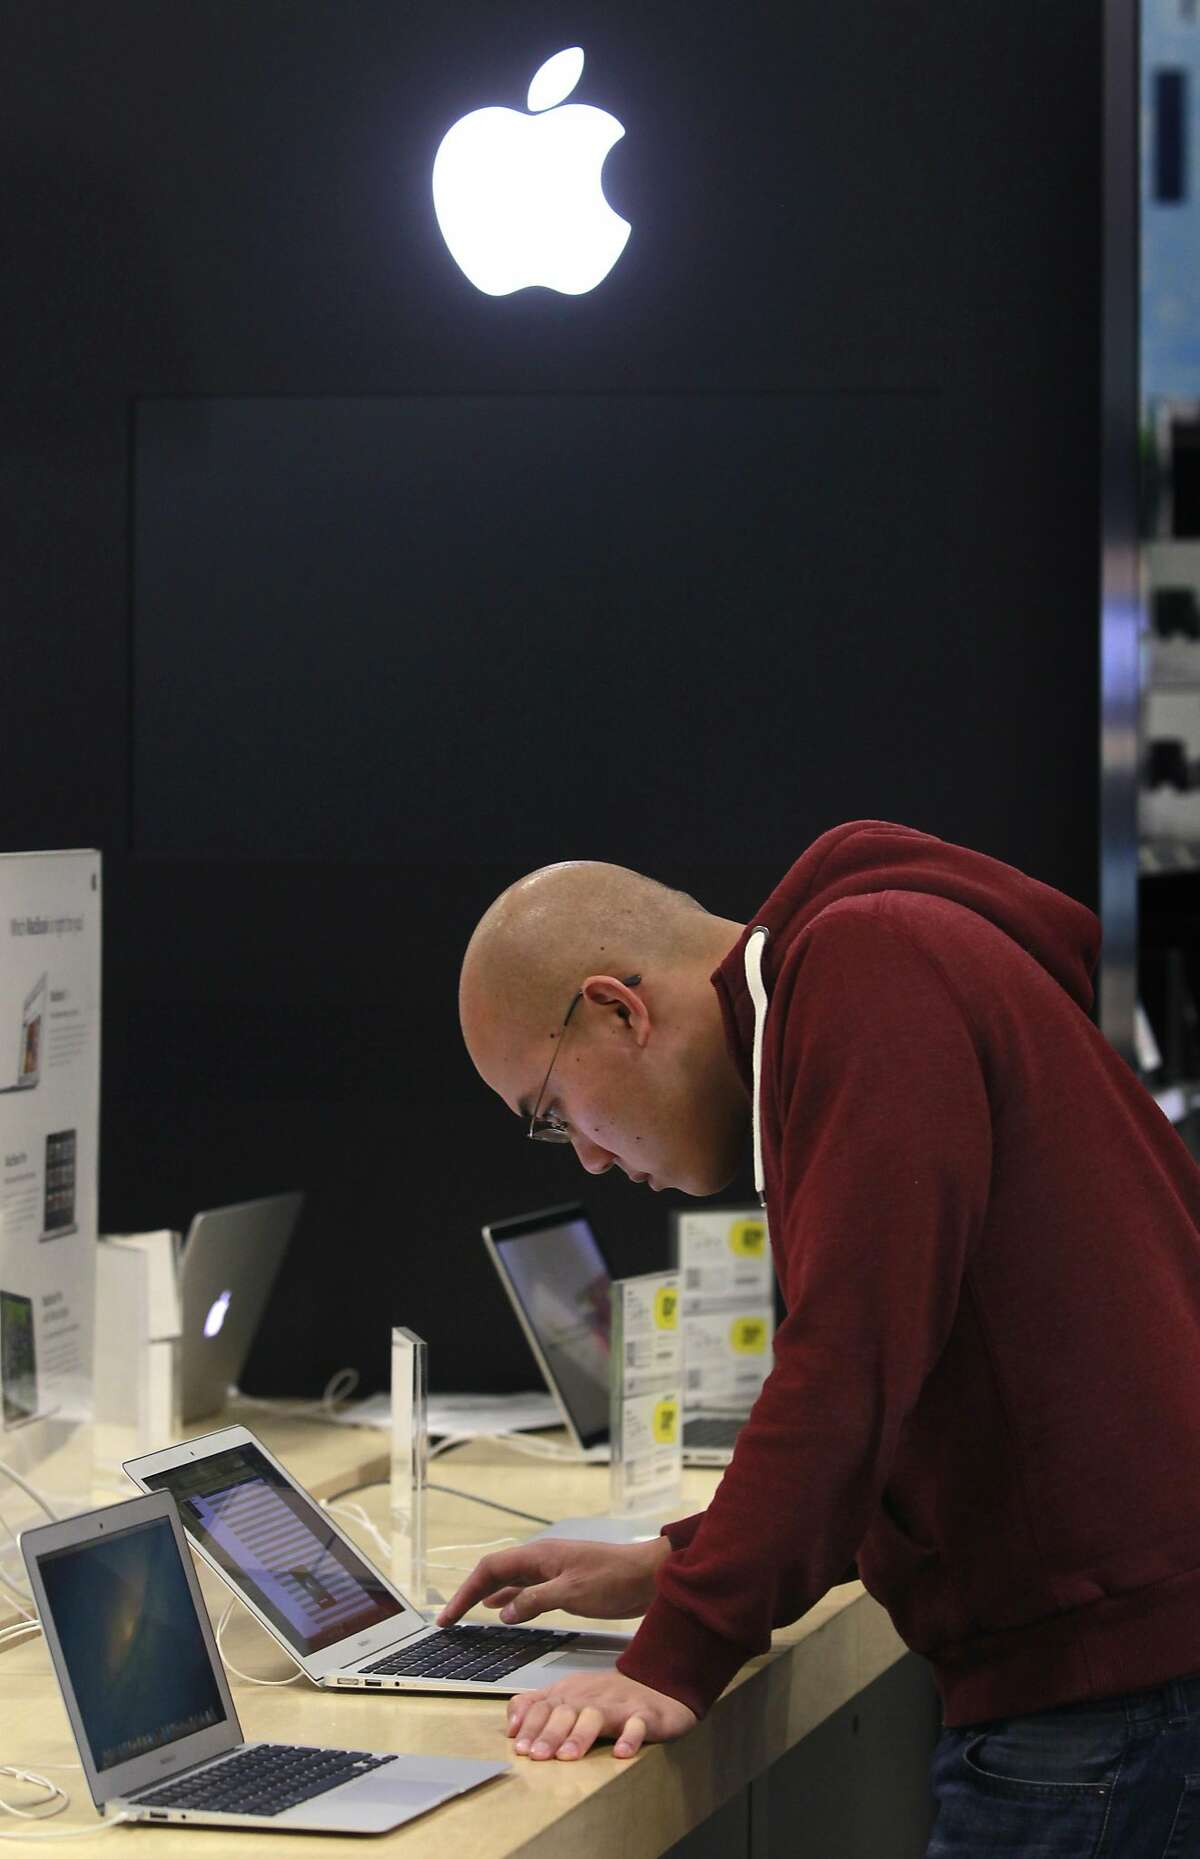 Alex Leong shops for a laptop computer during a lull in the Black Friday shopping rush at Best Buy in Oakland, Calif. on Friday, Nov. 23, 2012. Leong got to Best Buy at 3:30 a.m. after starting his shopping excursion at 9 p.m. Thursday in Livermore.